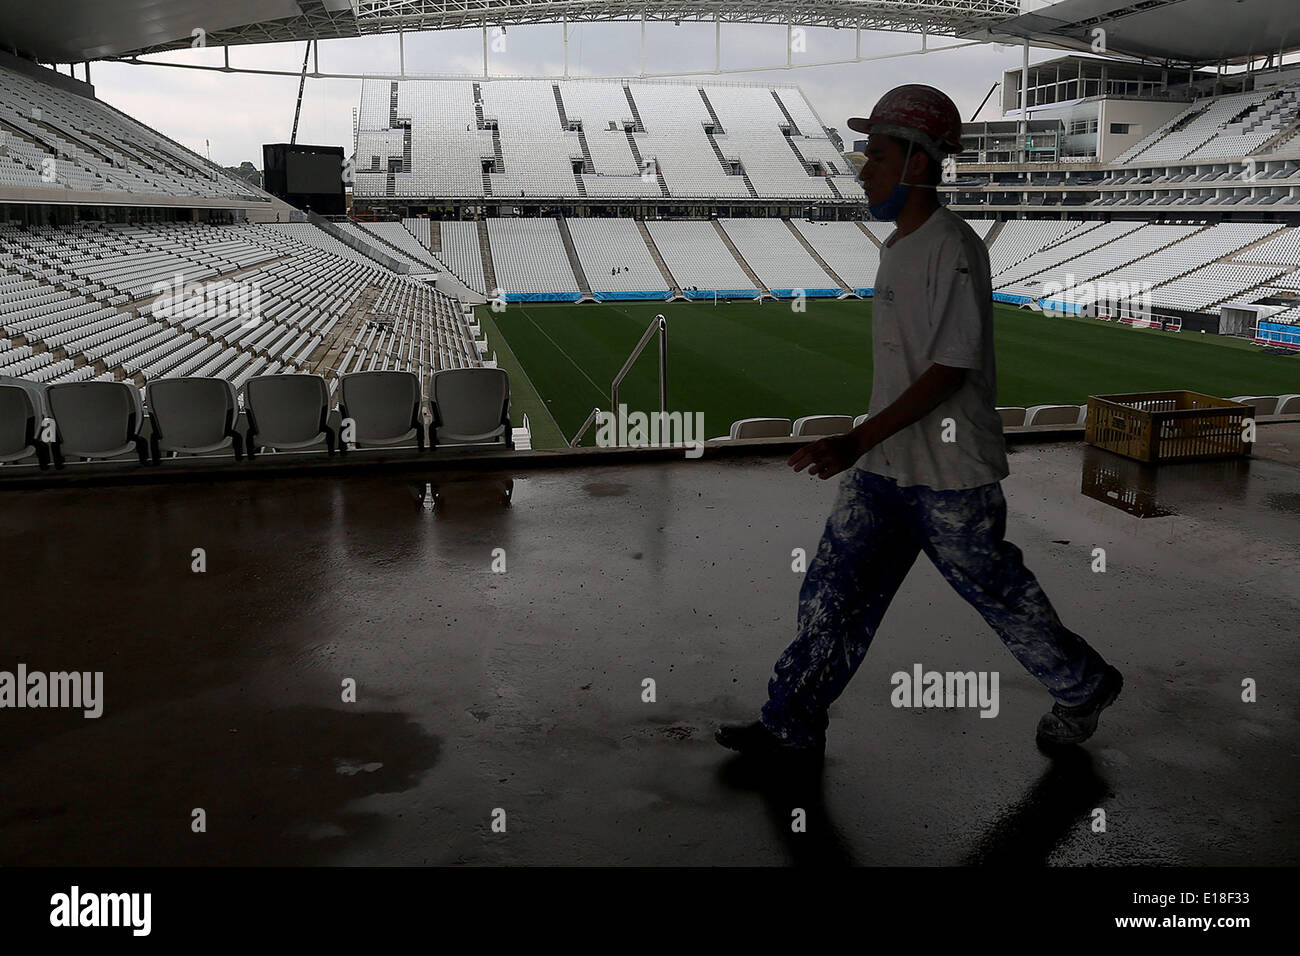 Sao Paulo, Brazil. 26th May, 2014. A worker walks inside the Sao Paulo Arena, in Sao Paulo city, Brazil, on May 26, 2014. The stadium also known as Corinthians Arena, will be the seat of the opening match of theBrazil 2014 FIFA World Cup on June 12. © Rahel Patrasso/Xinhua/Alamy Live News Stock Photo